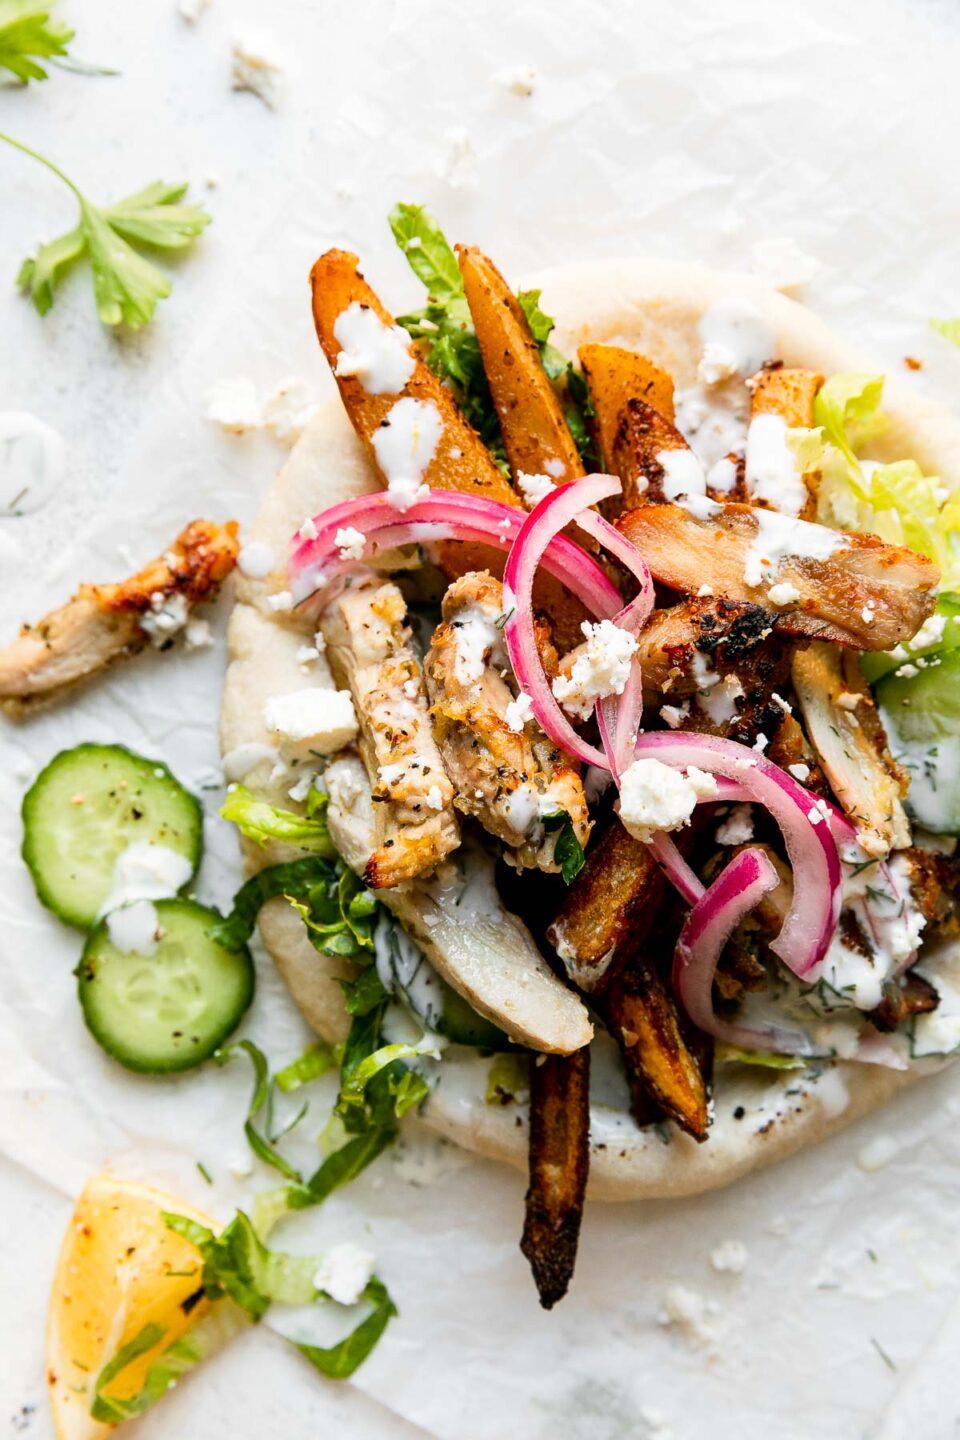 An assembled Greek Chicken Pita rests atop a crumpled sheet of white parchment paper. The pita has been piled high with sliced lemony Greek chicken, oven-roasted Greek fries, shredded lettuce, crumbled feta, sliced cucumber, pickled red onion, and a drizzle of tzatziki-ish herbed yogurt sauce. Surrounding the pita is loose fresh herbs, a few slices of cucumber, a lemon wedge, and crumbled feta. All items sit atop a creamy white textured surface.